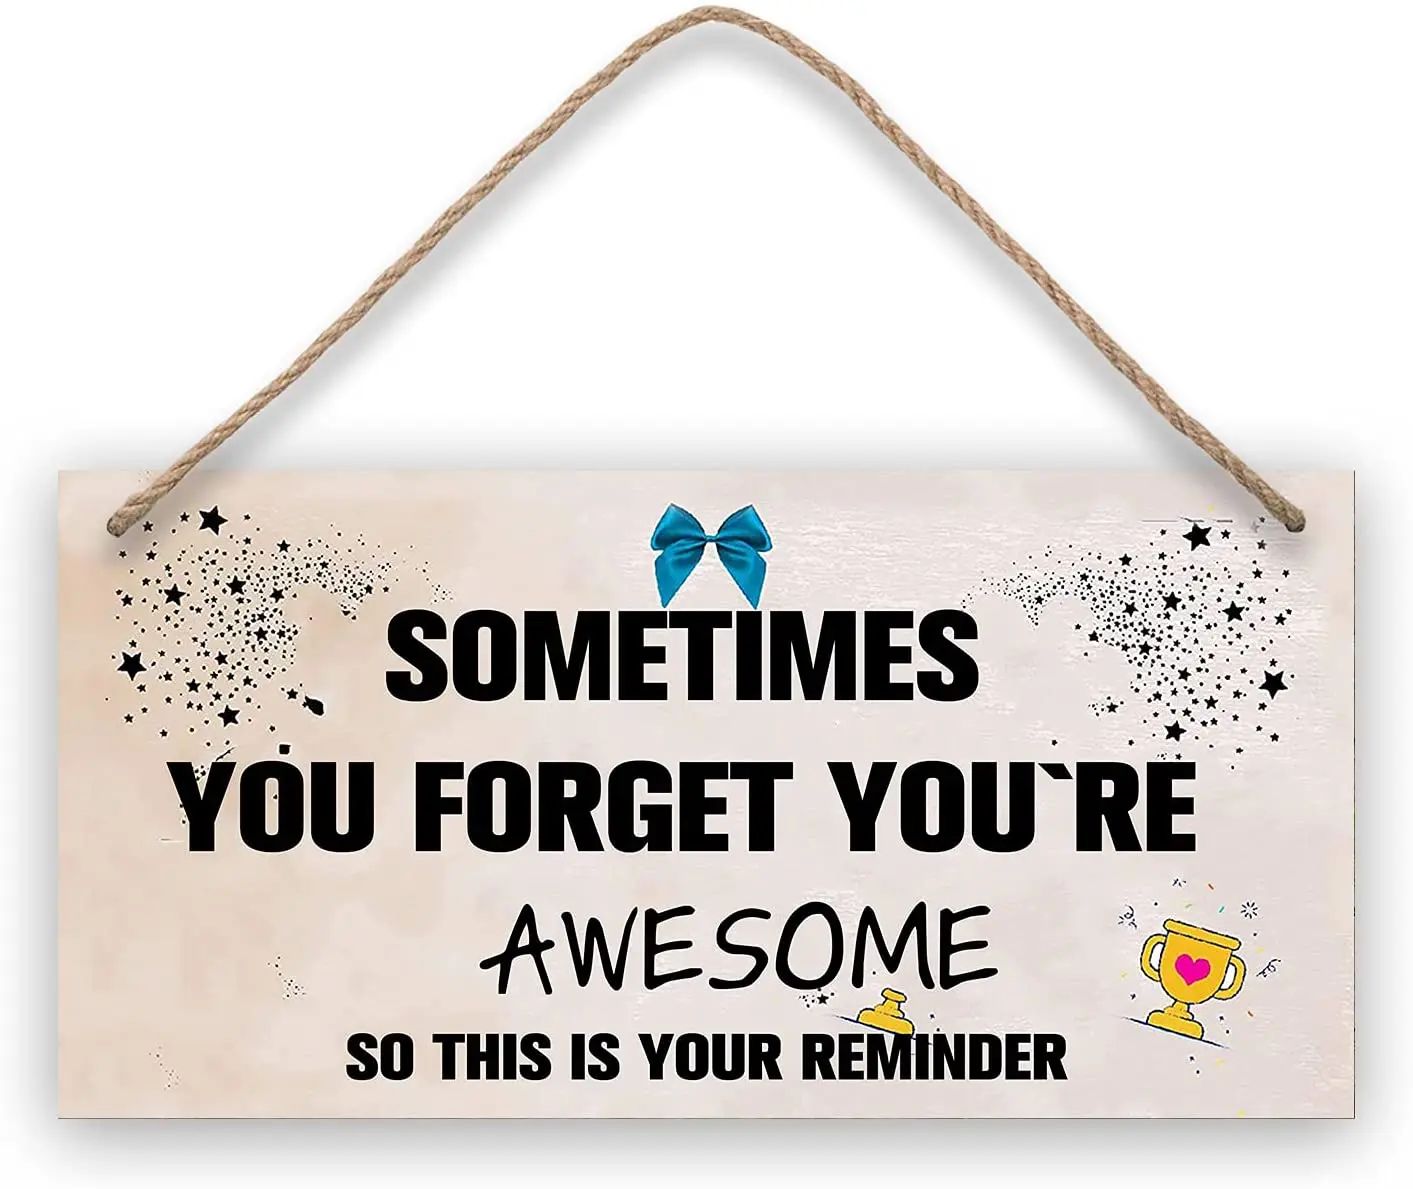 

Thank You Wooden Sign, Sometime You Forget You're Awesome So This is Your Reminder Wood Sign Inspirational Wall Decor